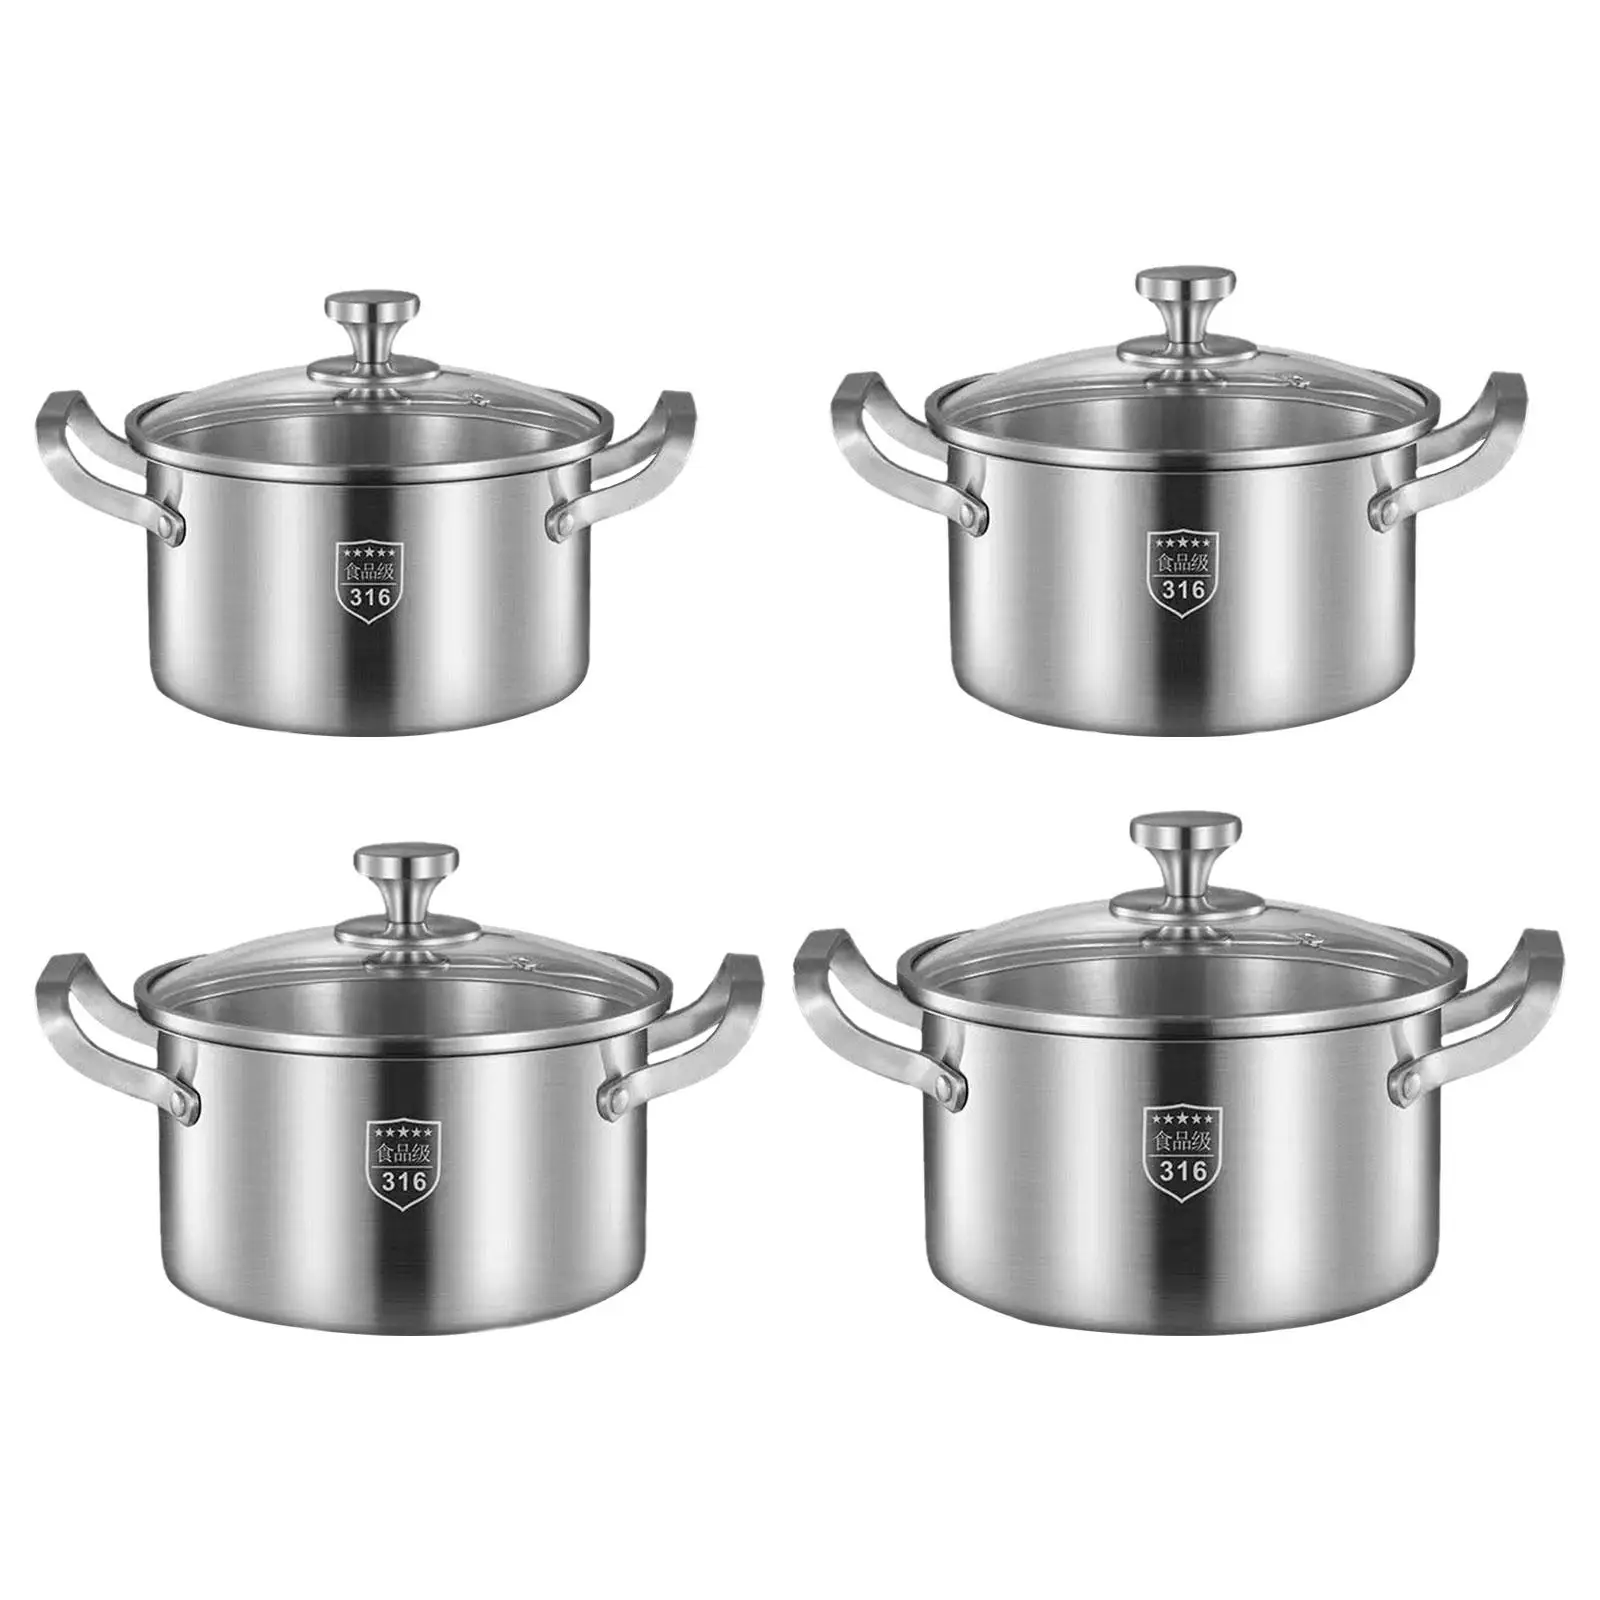 Soup Pot Cooking Tools Ergonomic Handle Works Stainless Steel Stockpot with Lid Kitchen Pot for Home Kitchen Bar Restaurant